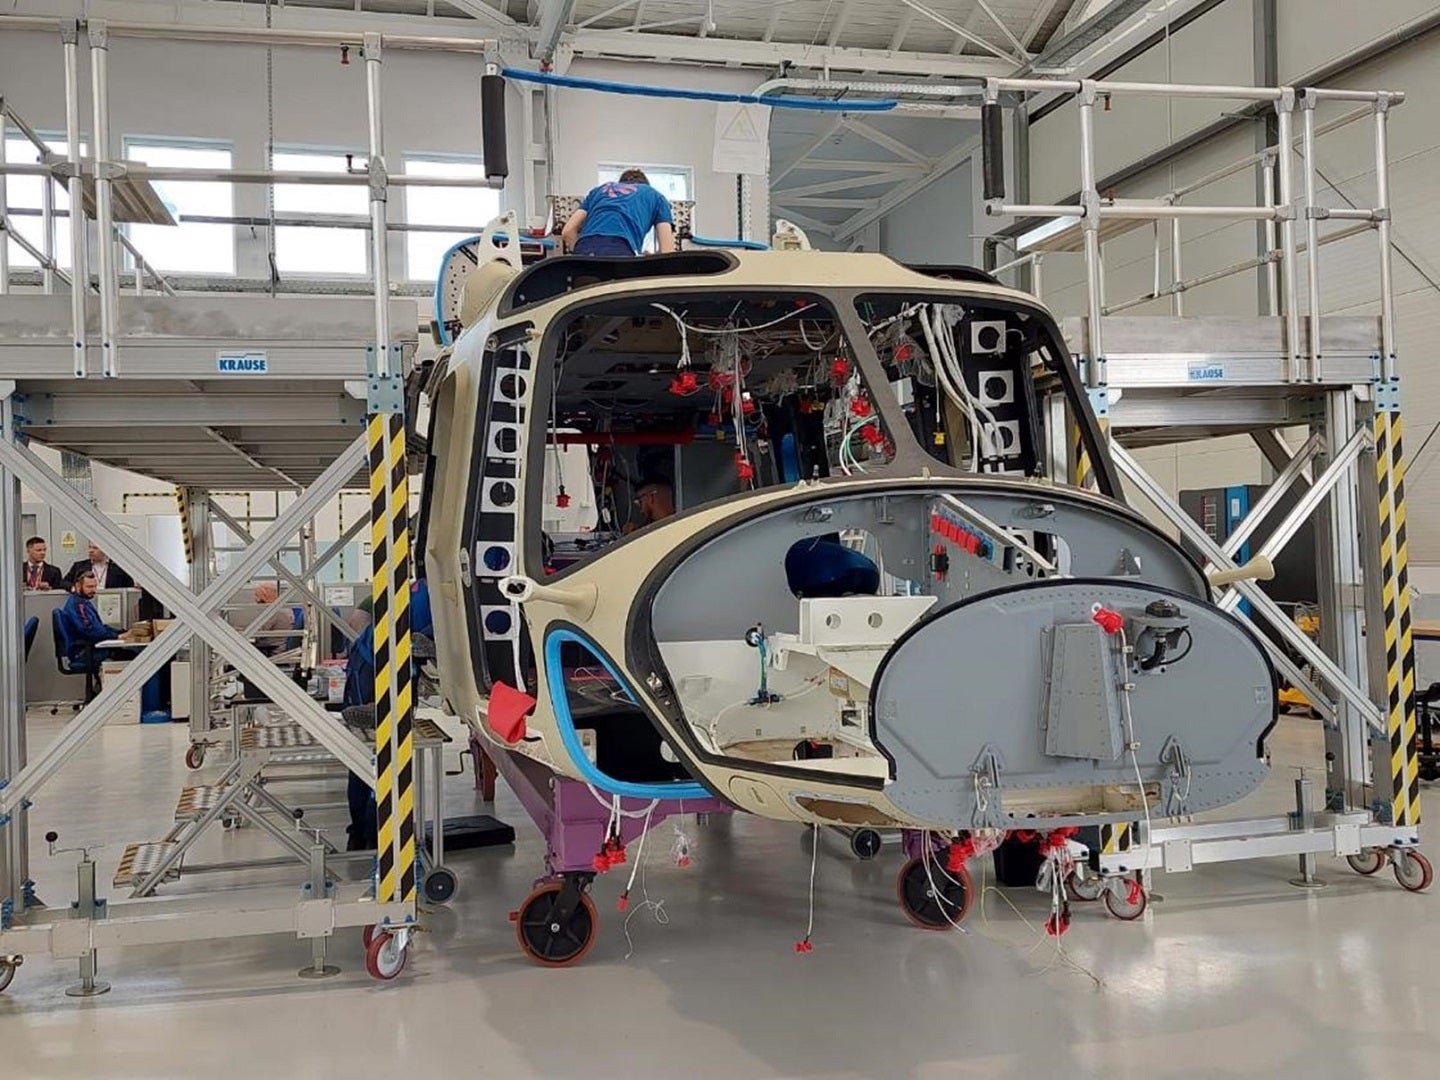 Leonardo’s AW149 helicopter production line takes flight in Poland